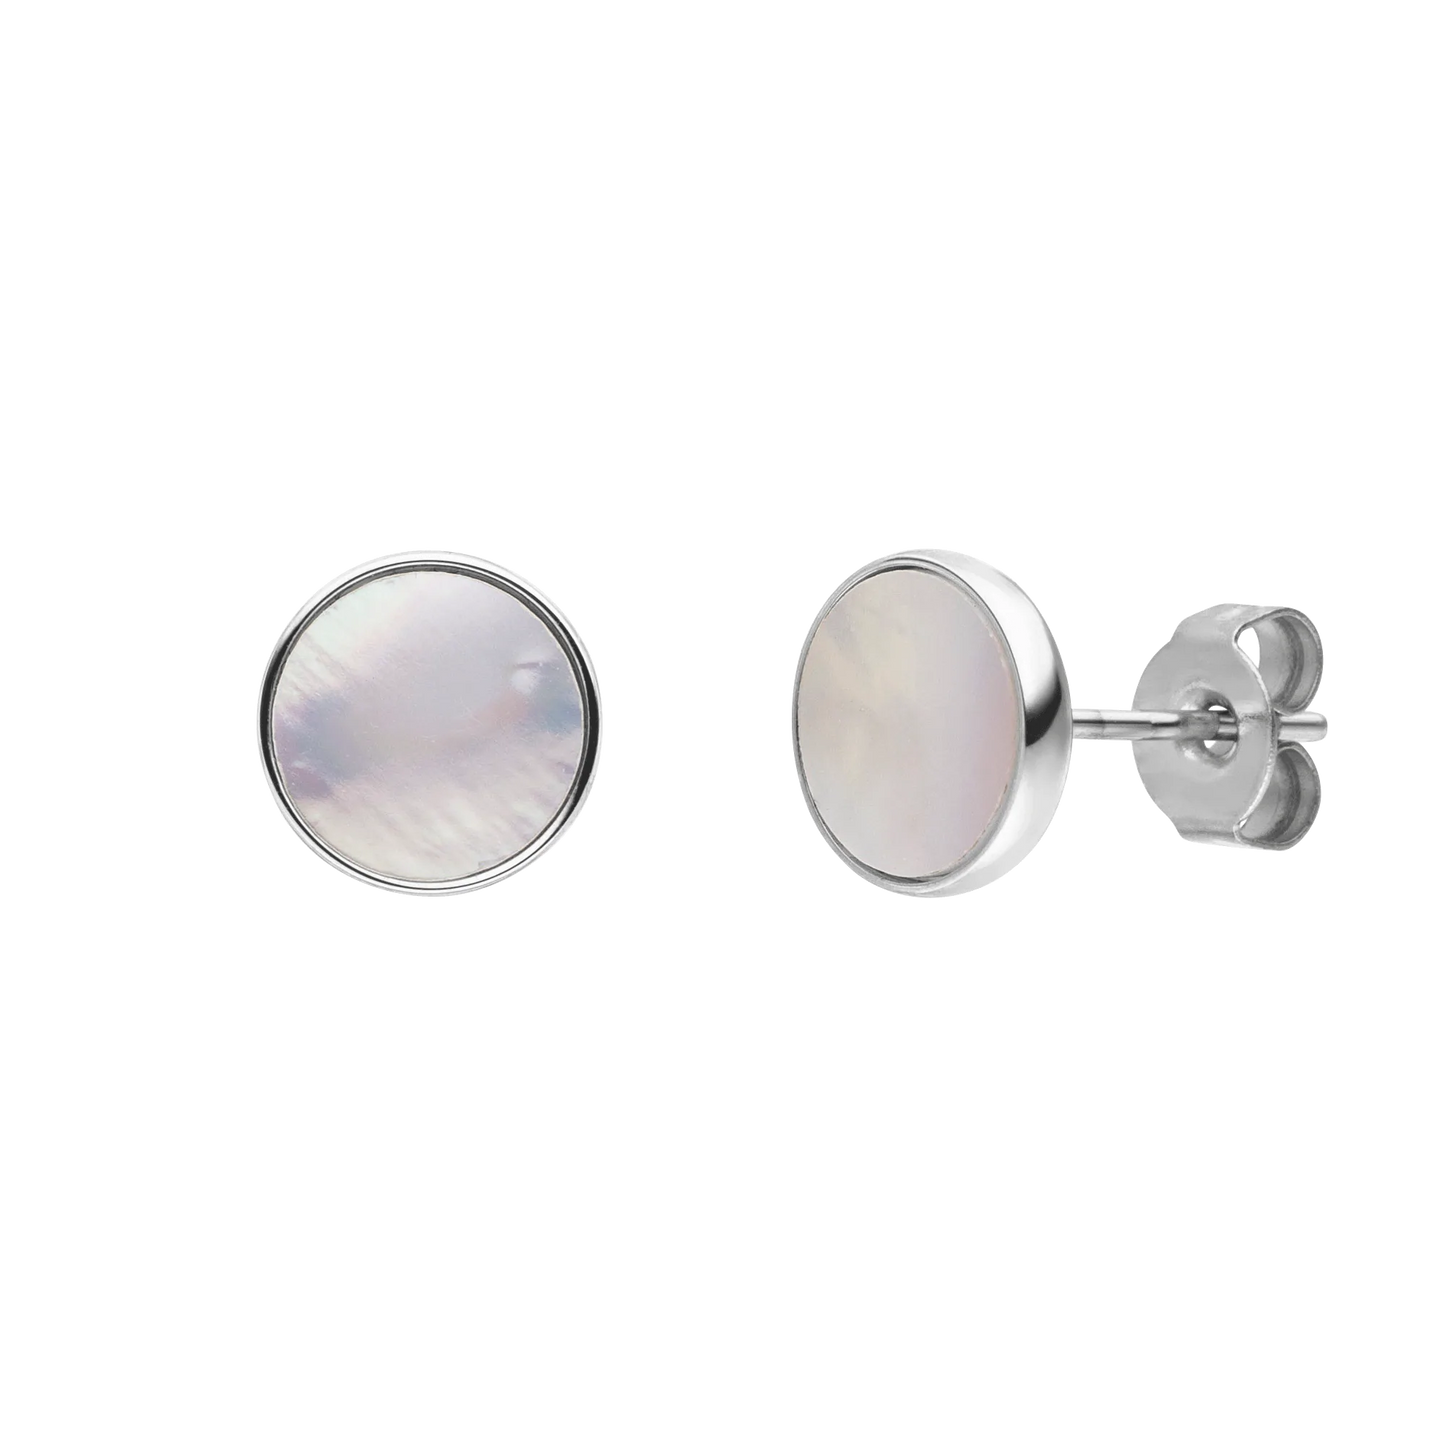 HOMME LA PEARLA | Silver Stainless Steel 8MM Round White Mother of Pearl Shell Stud Earrings